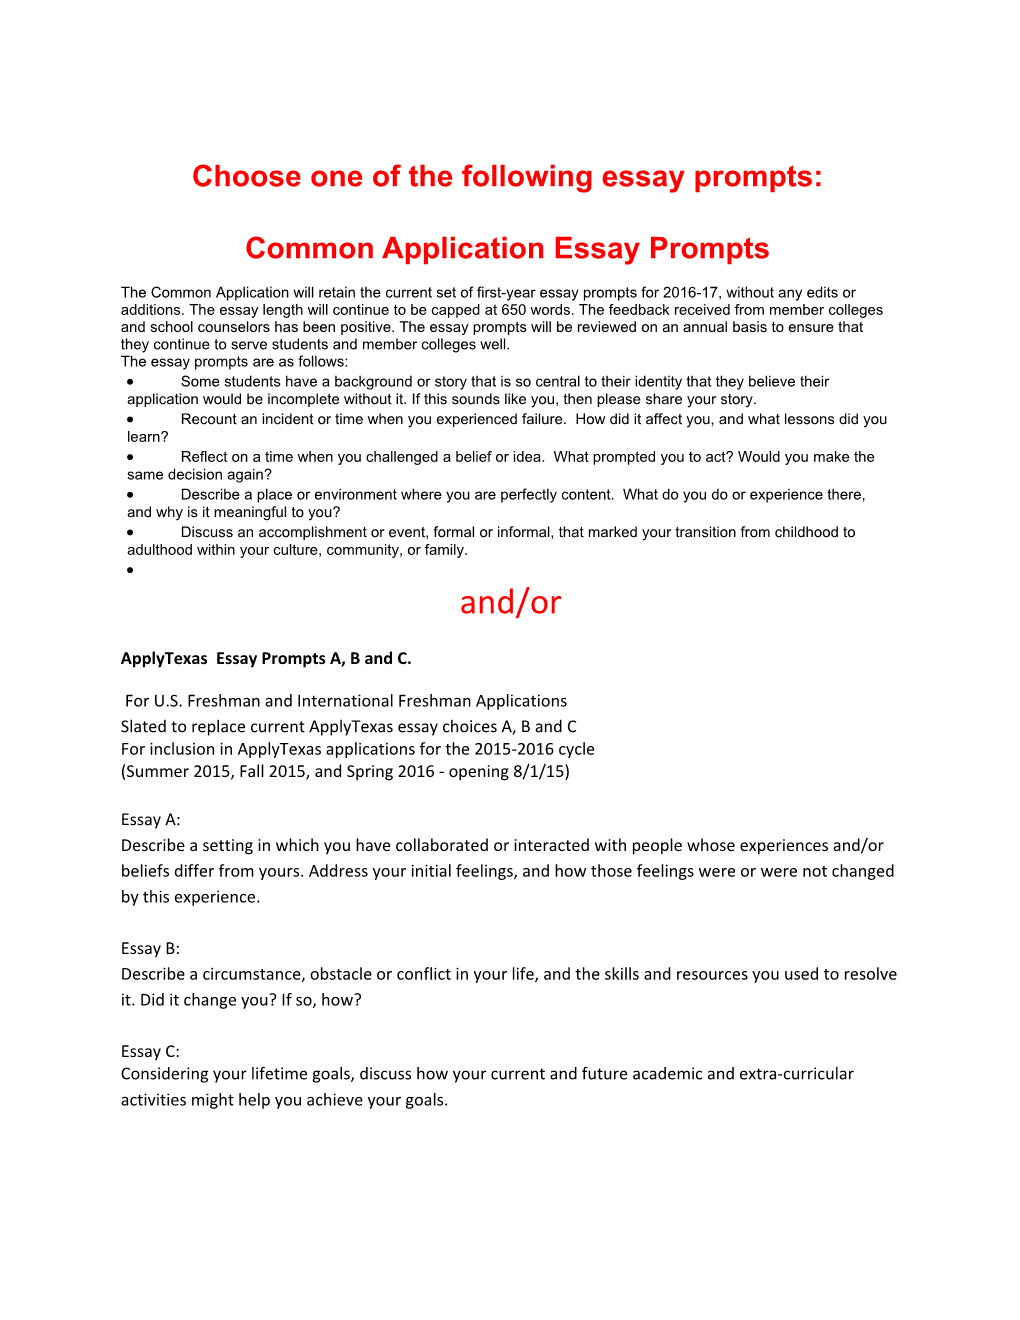 Choose One of the Following Essay Prompts